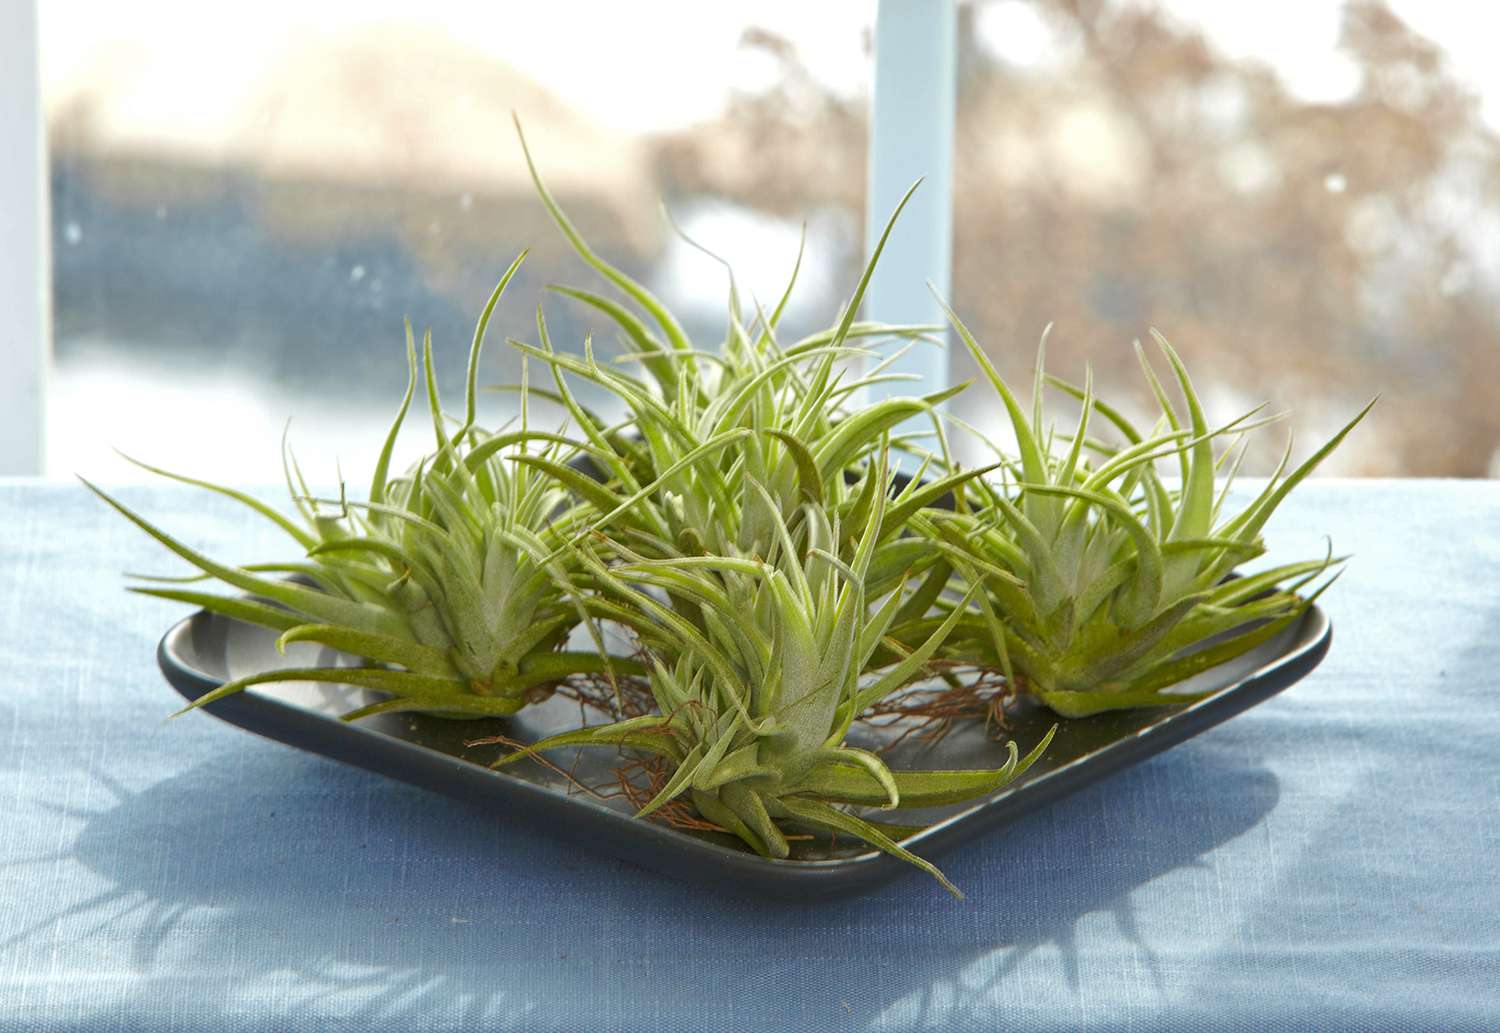 four air plants on black plate by window